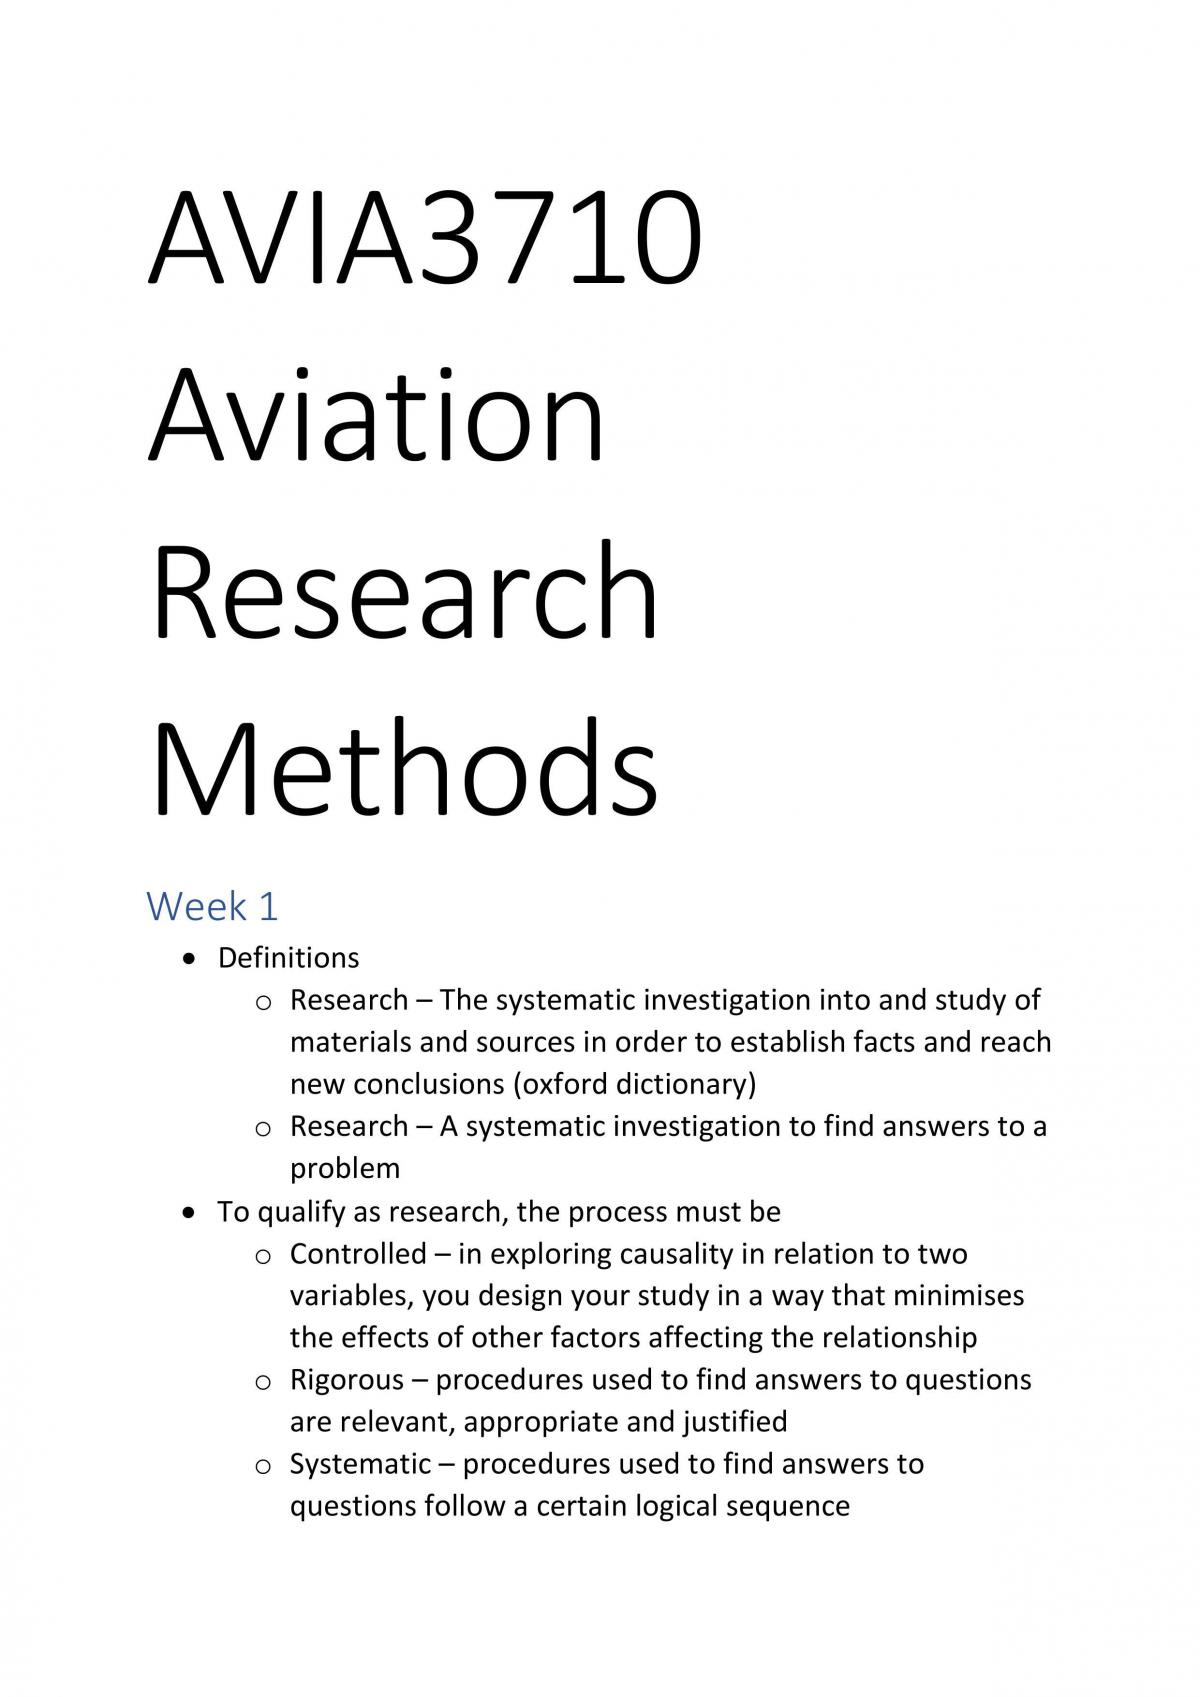 research papers on planes